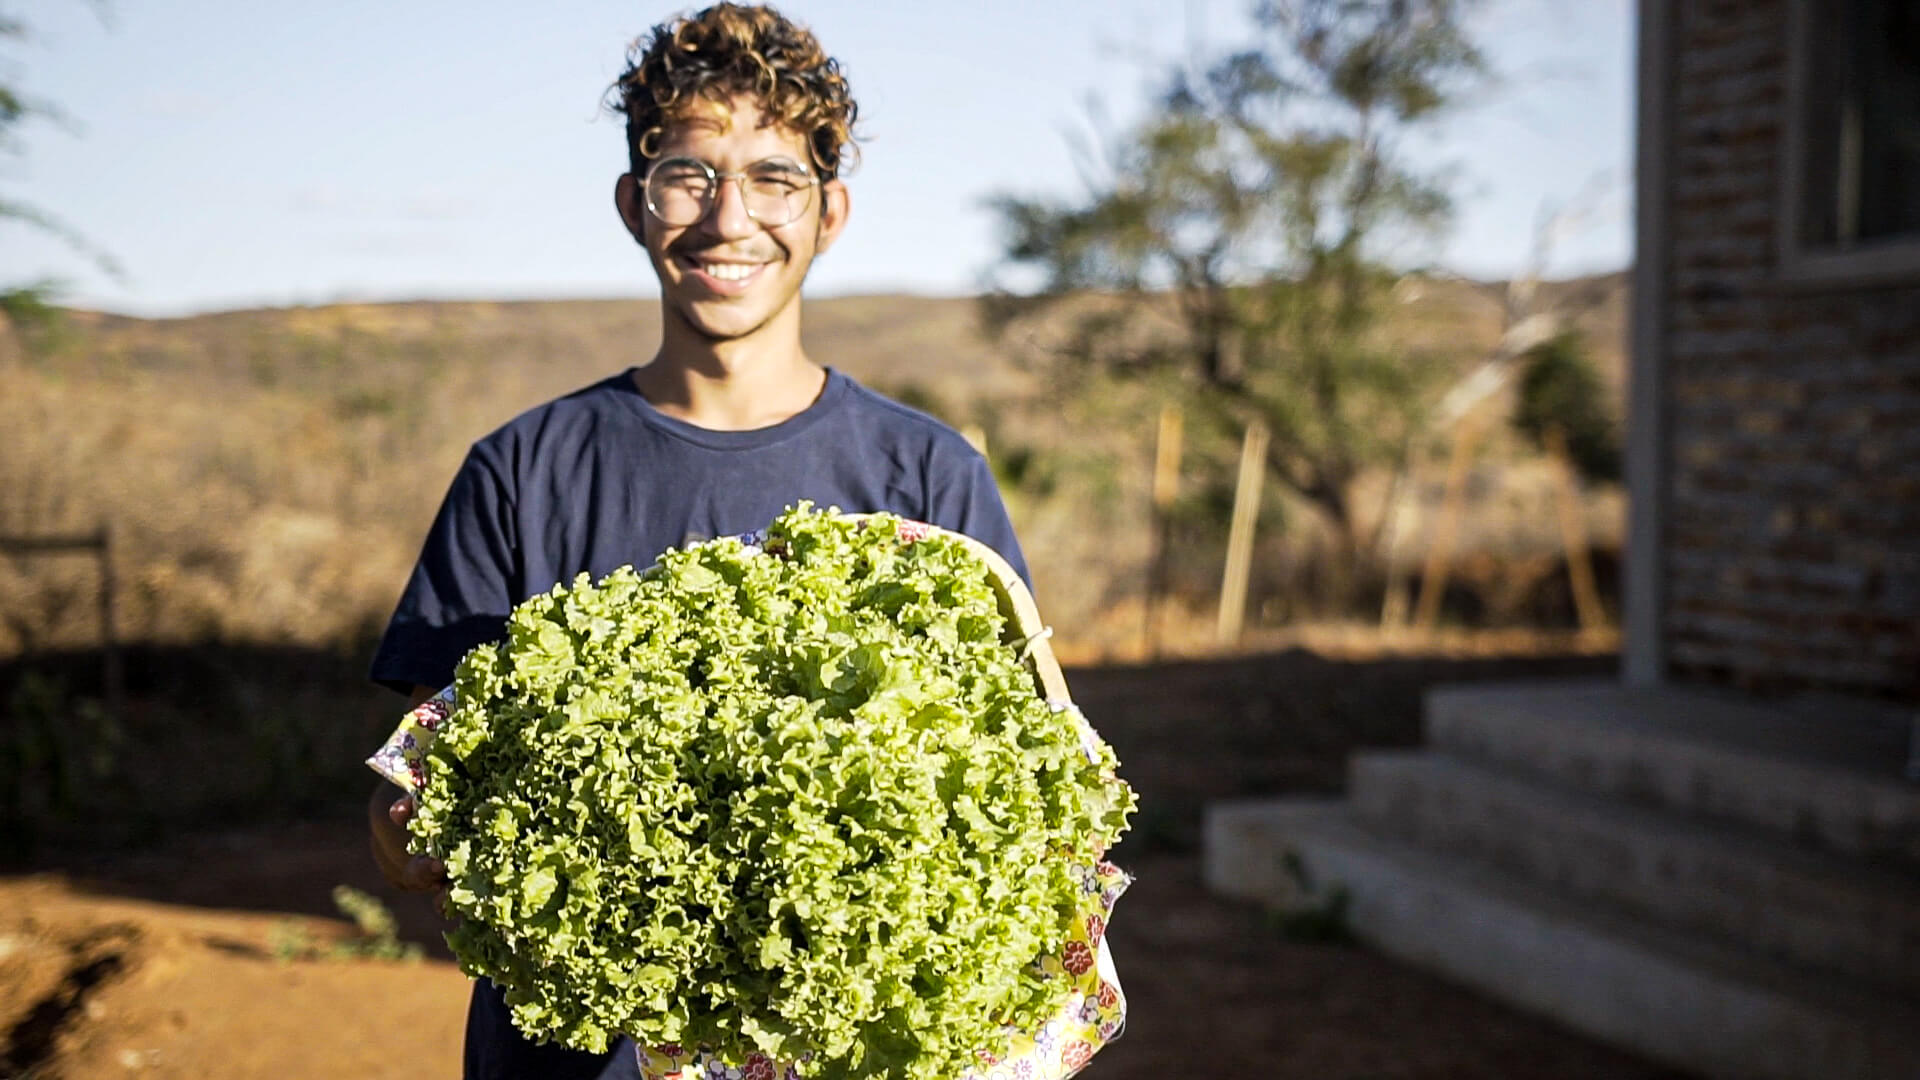 5 initiatives that work towards <b>food security</b> in Brazil